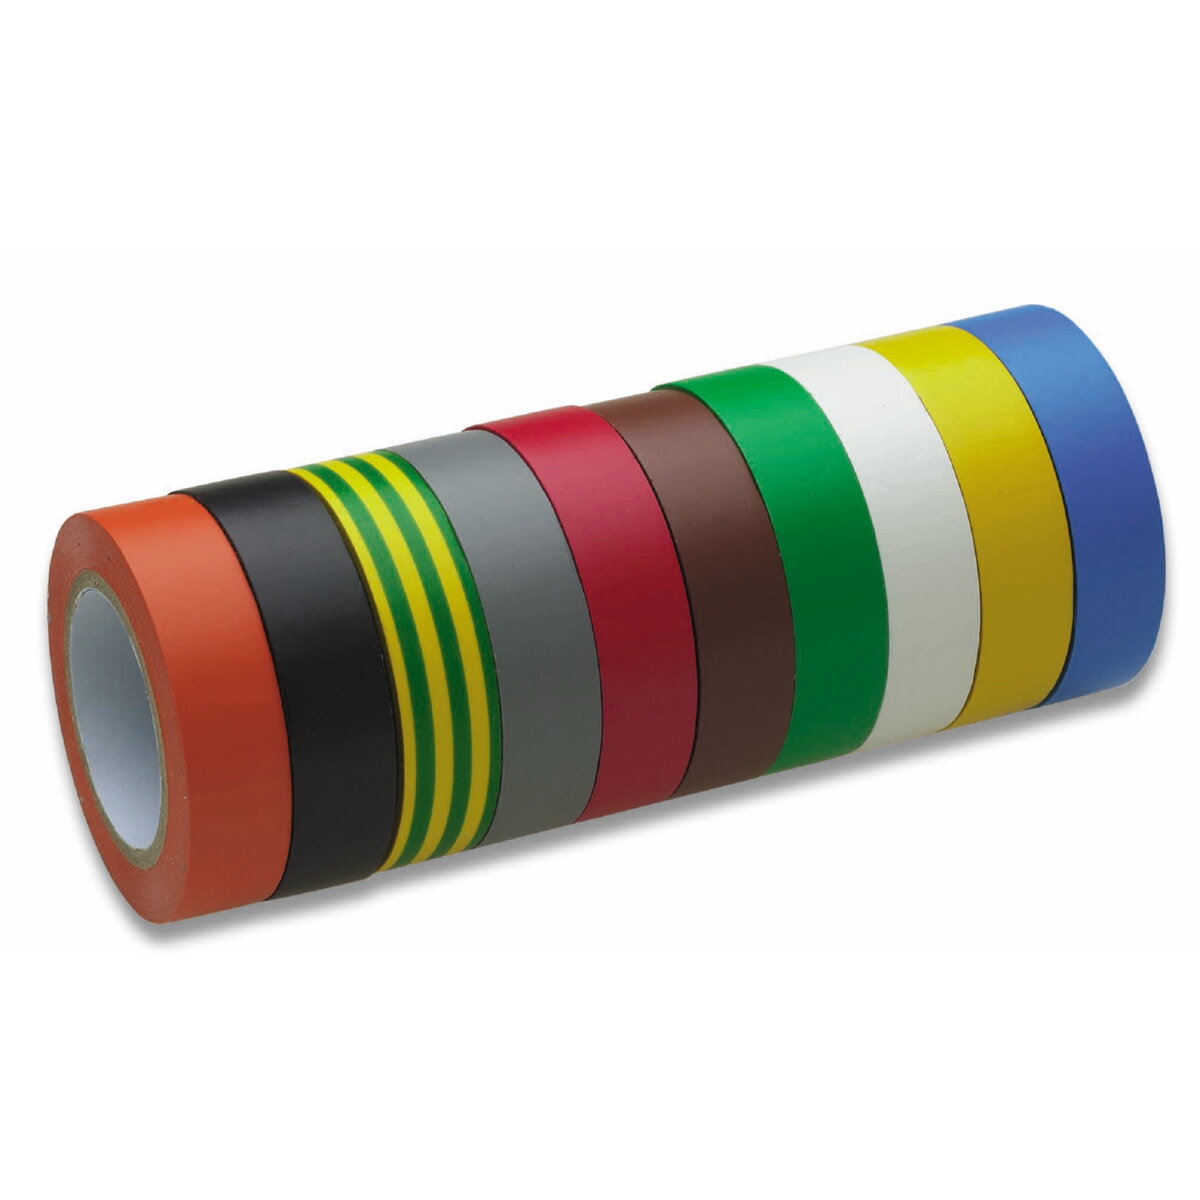 Cimco Universal-Isolierband 10 farben LxB: 10x15mm 160000